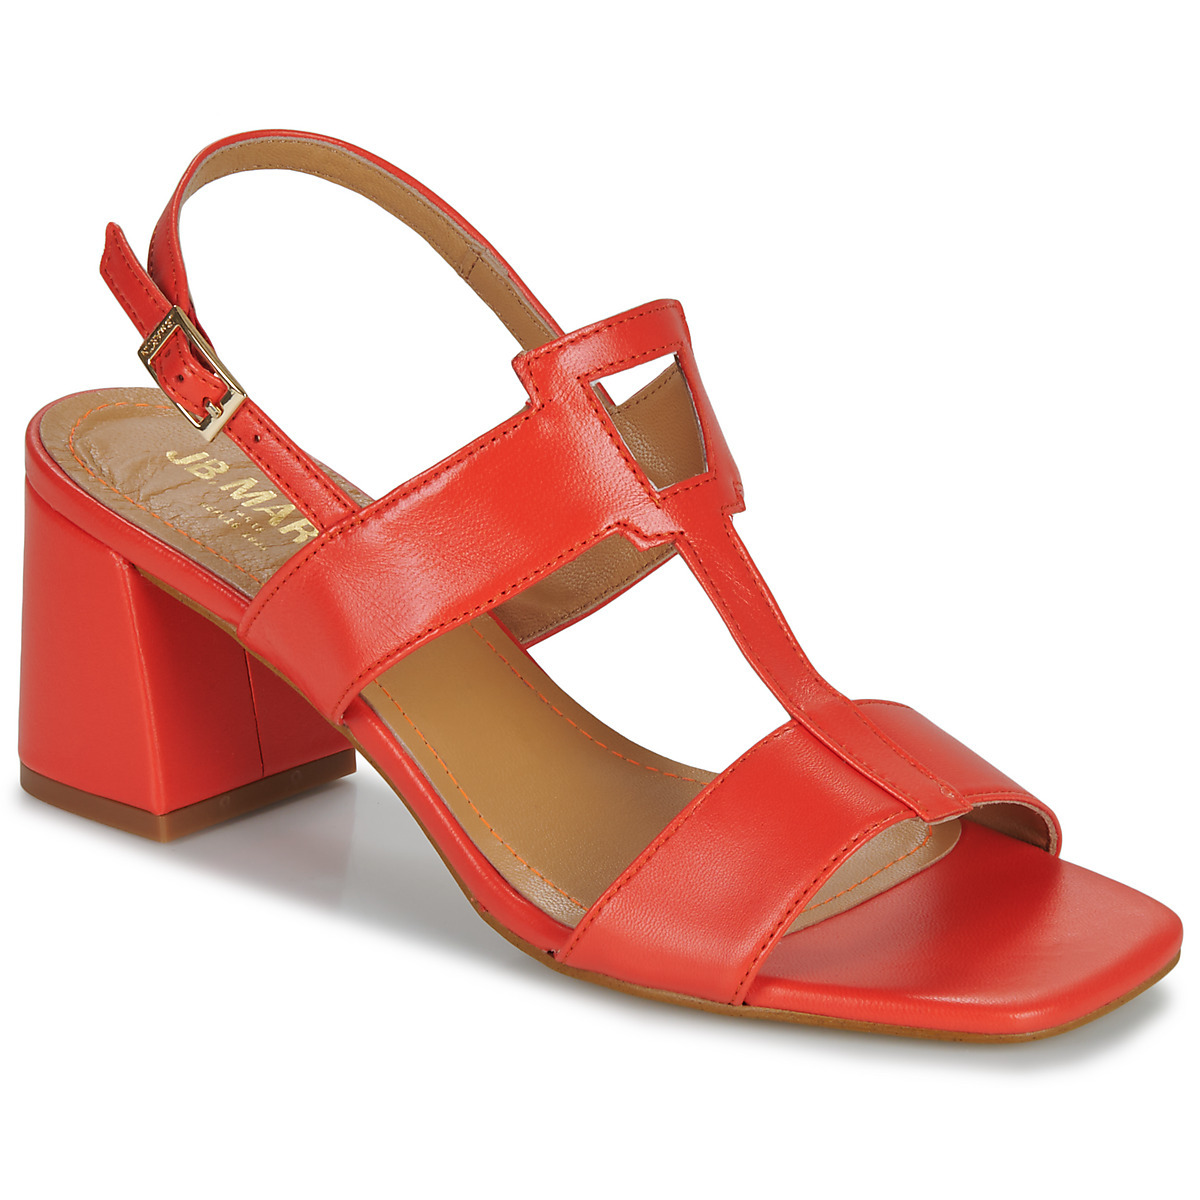 Jb Martin Sandals Red for Women from Spartoo GOOFASH